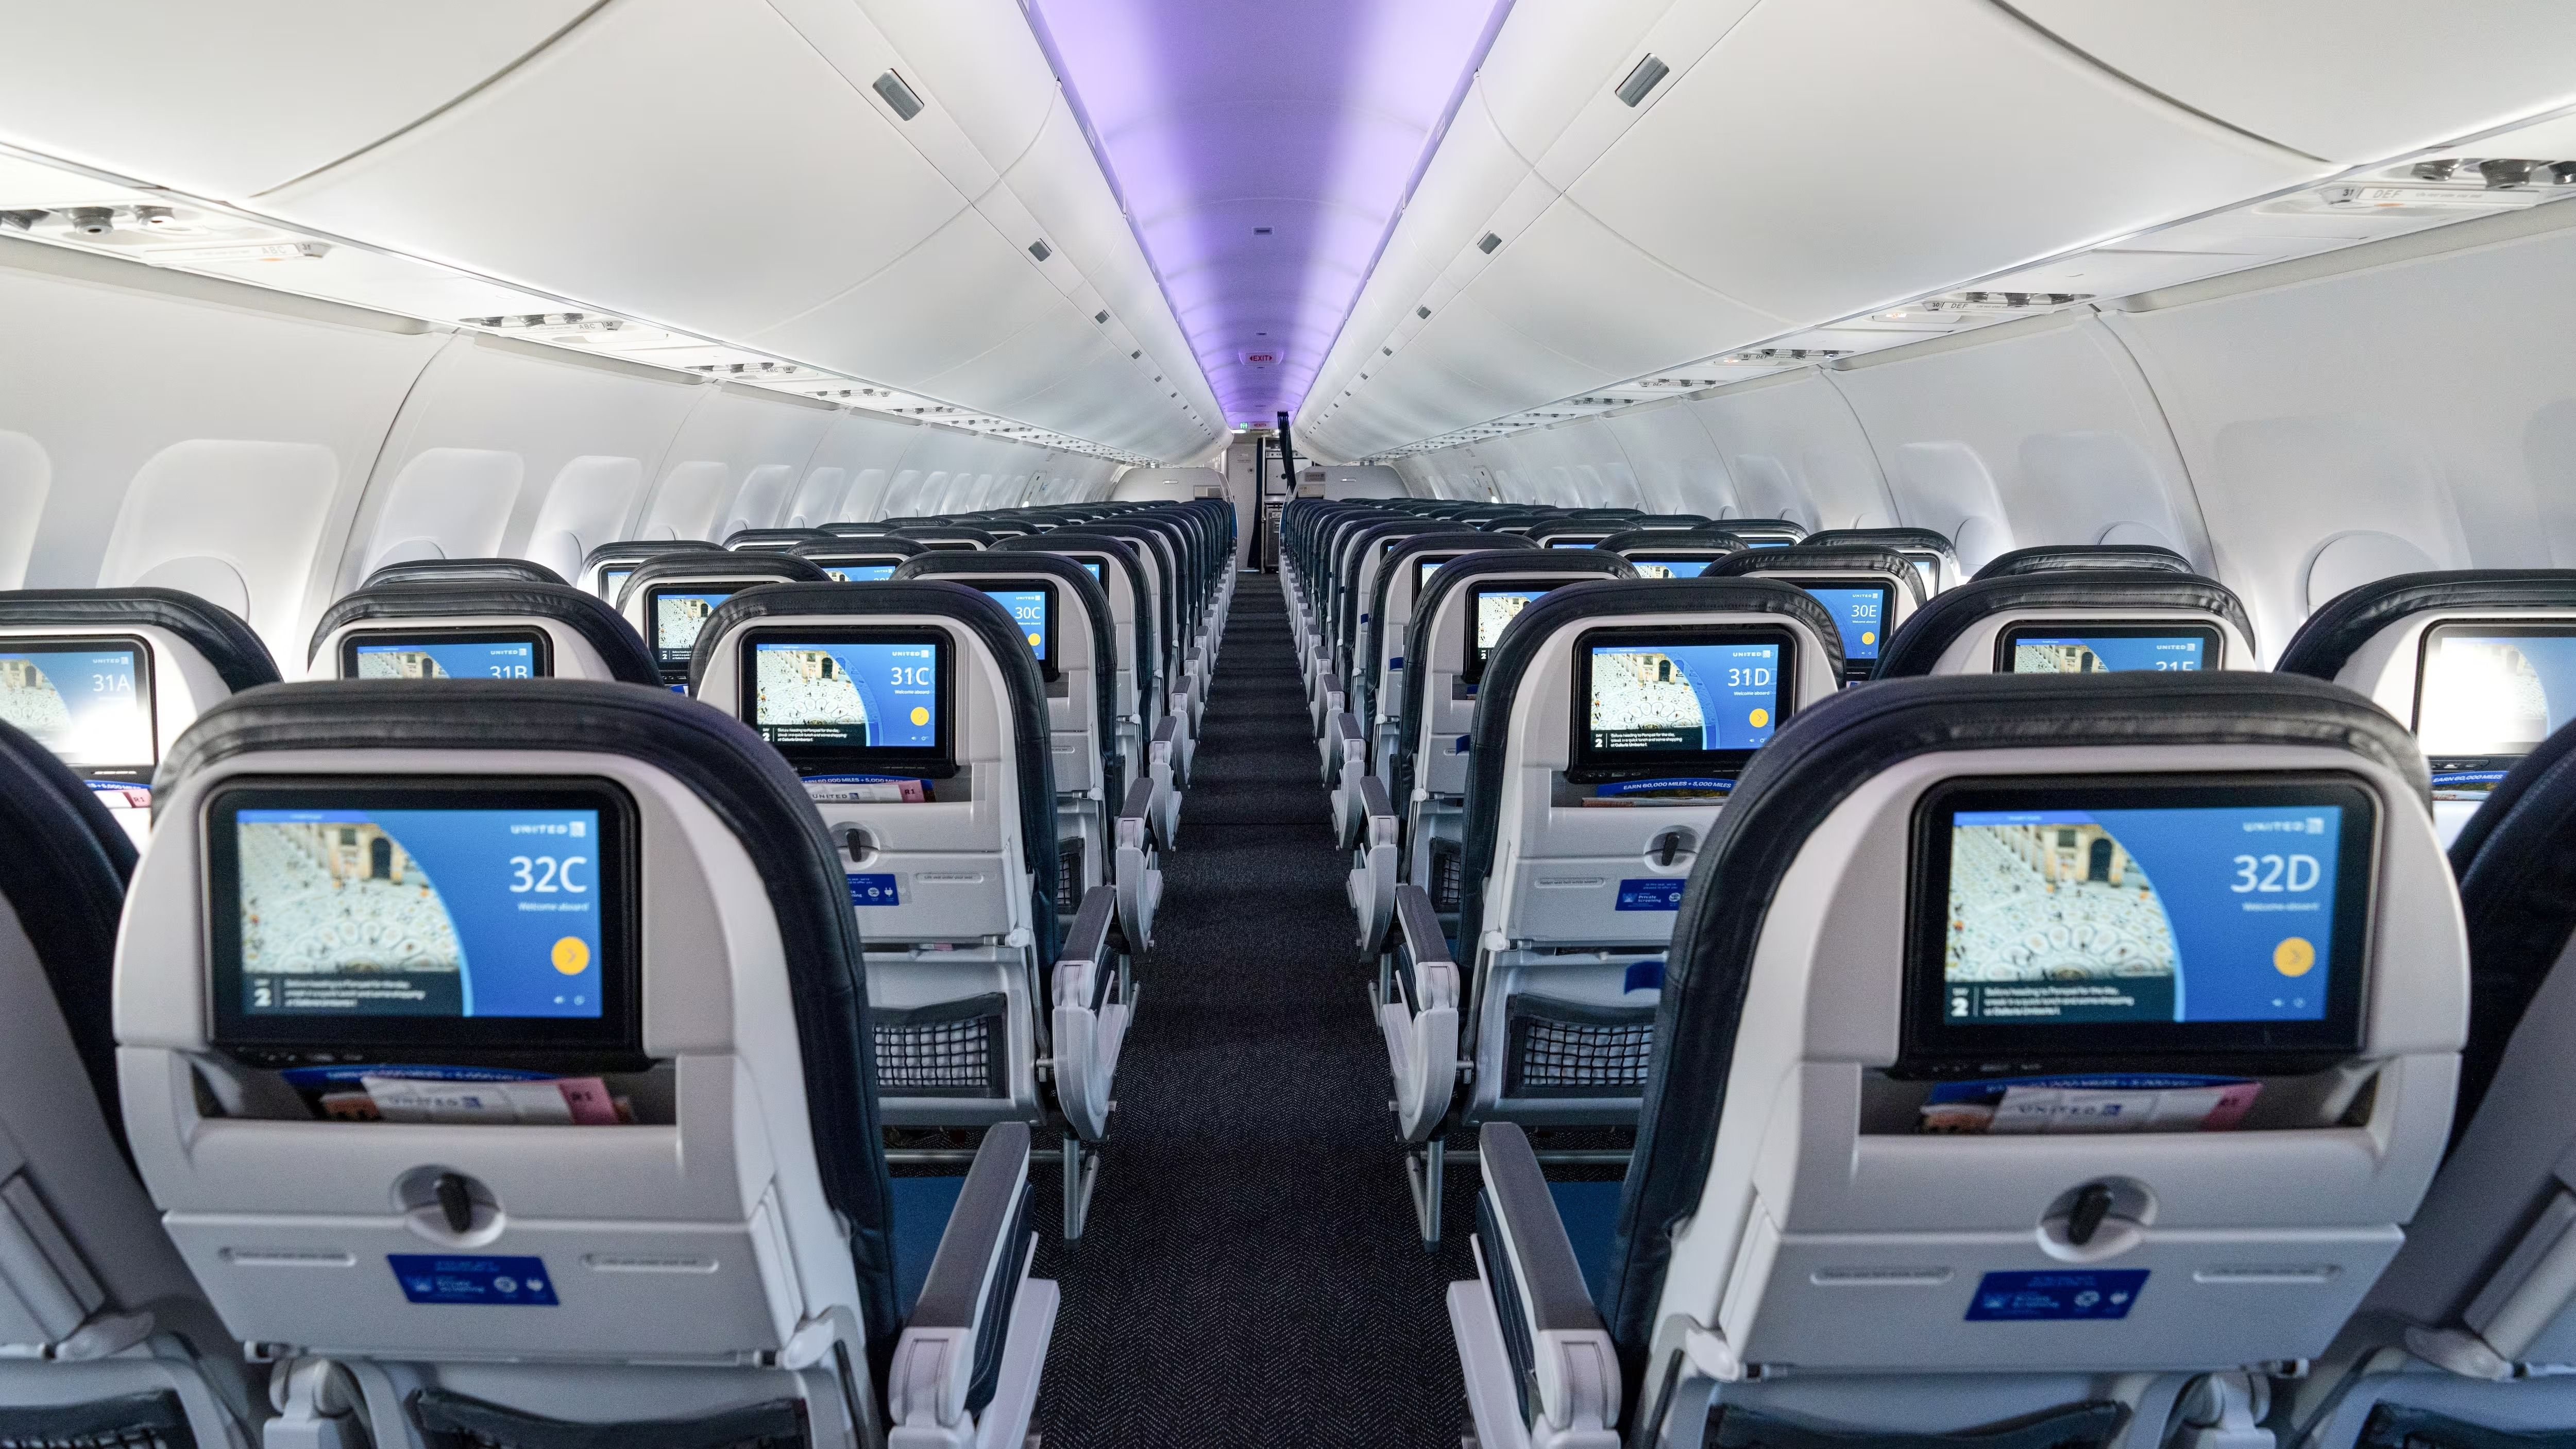 United Airlines' Airbus A319 cabin